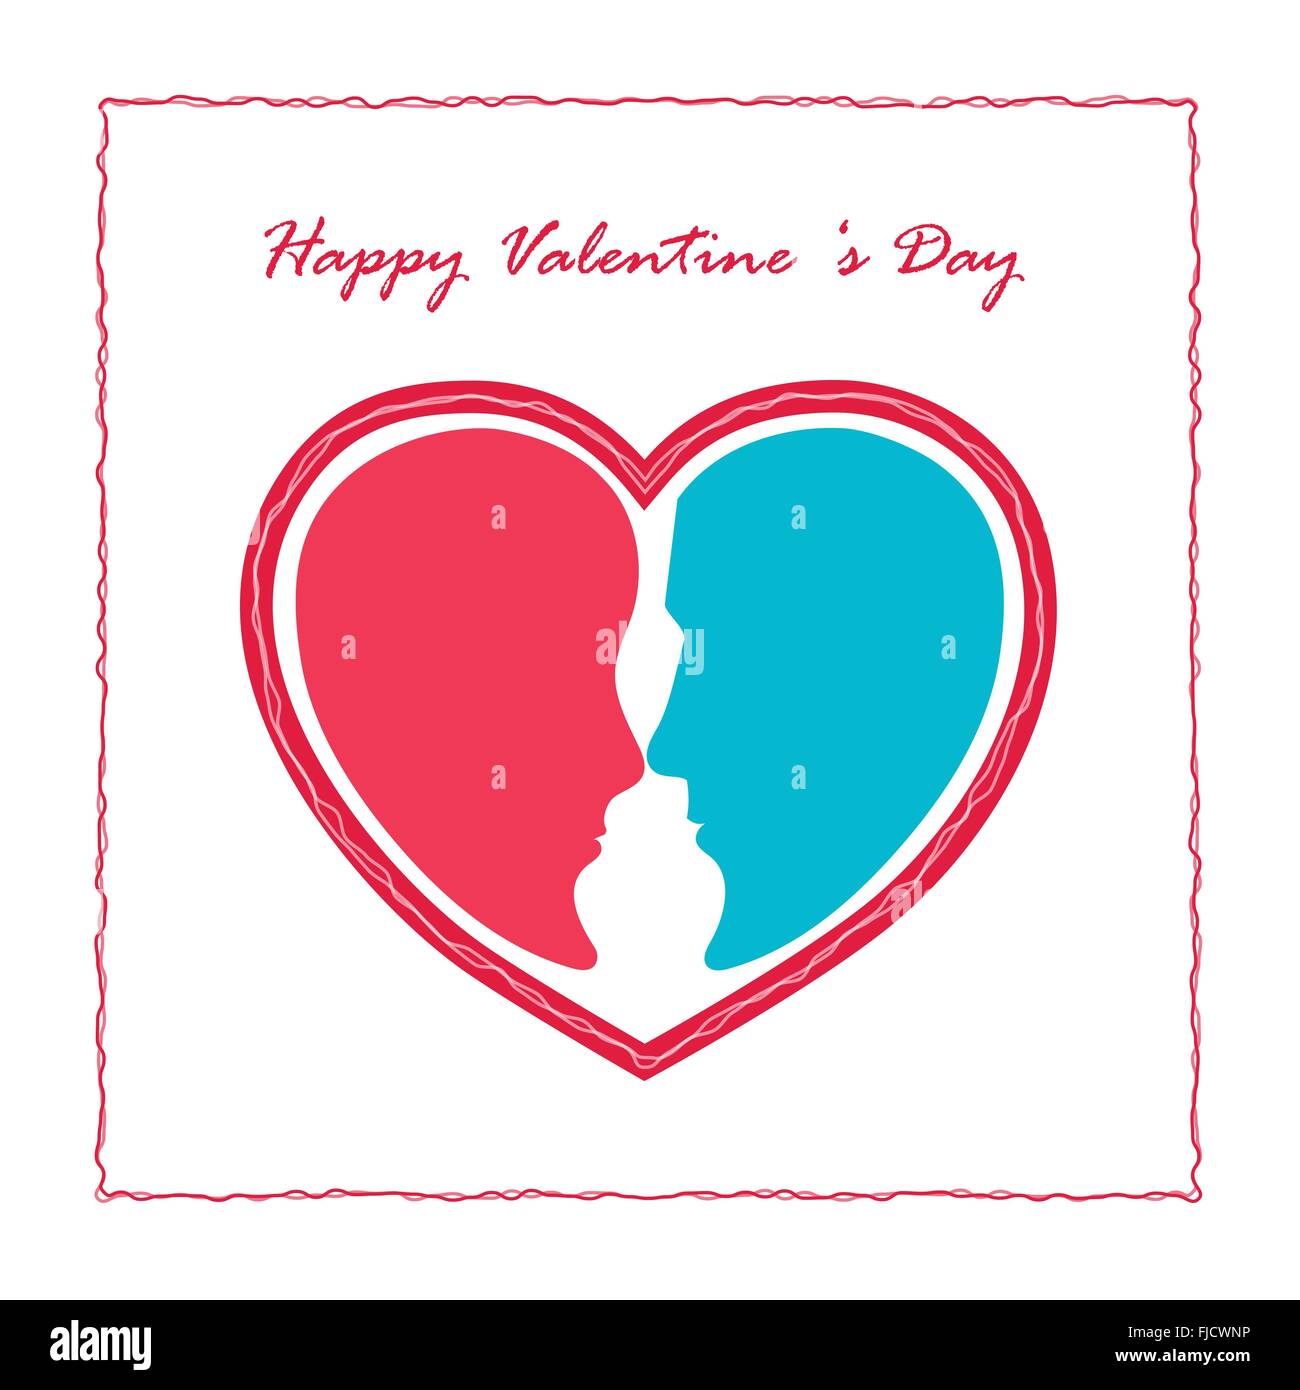 Man face and woman face with red heart shape.Wedding concept.Happy Valentines day symbol.Vector illustration Stock Vector